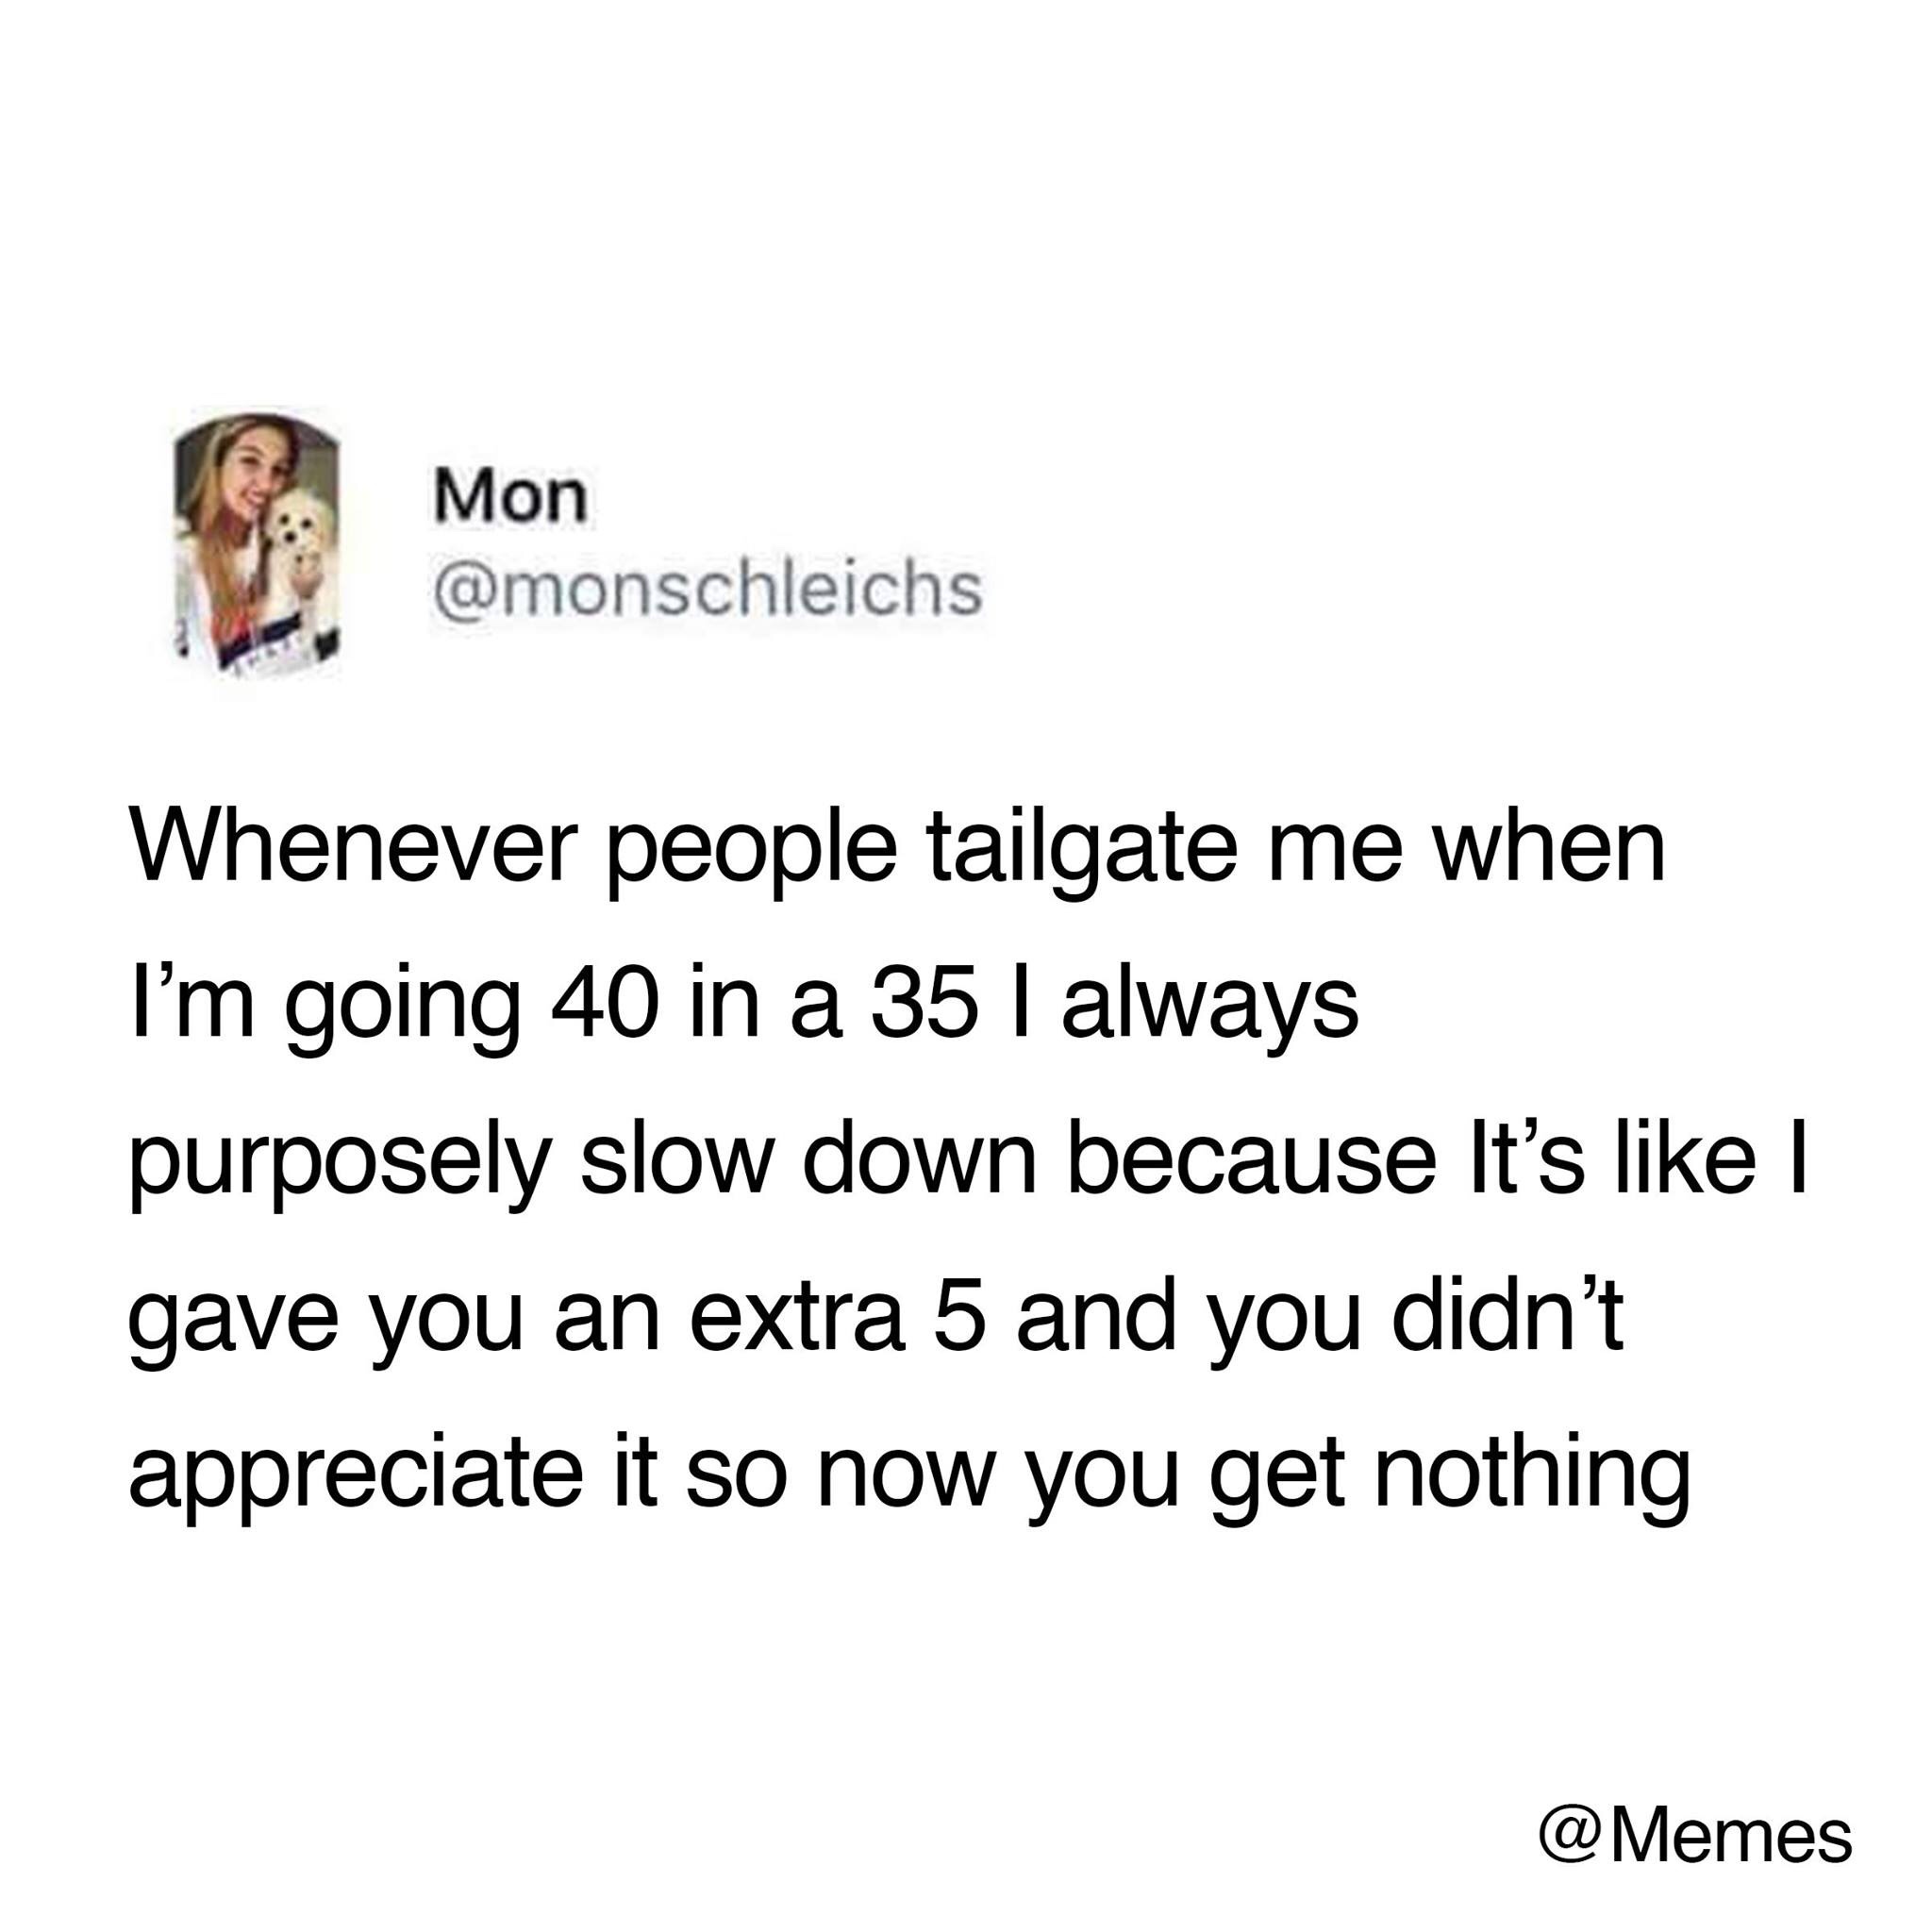 funny memes - quotes - Mon Whenever people tailgate me when I'm going 40 in a 35 I always purposely slow down because It's I gave you an extra 5 and you didn't appreciate it so now you get nothing